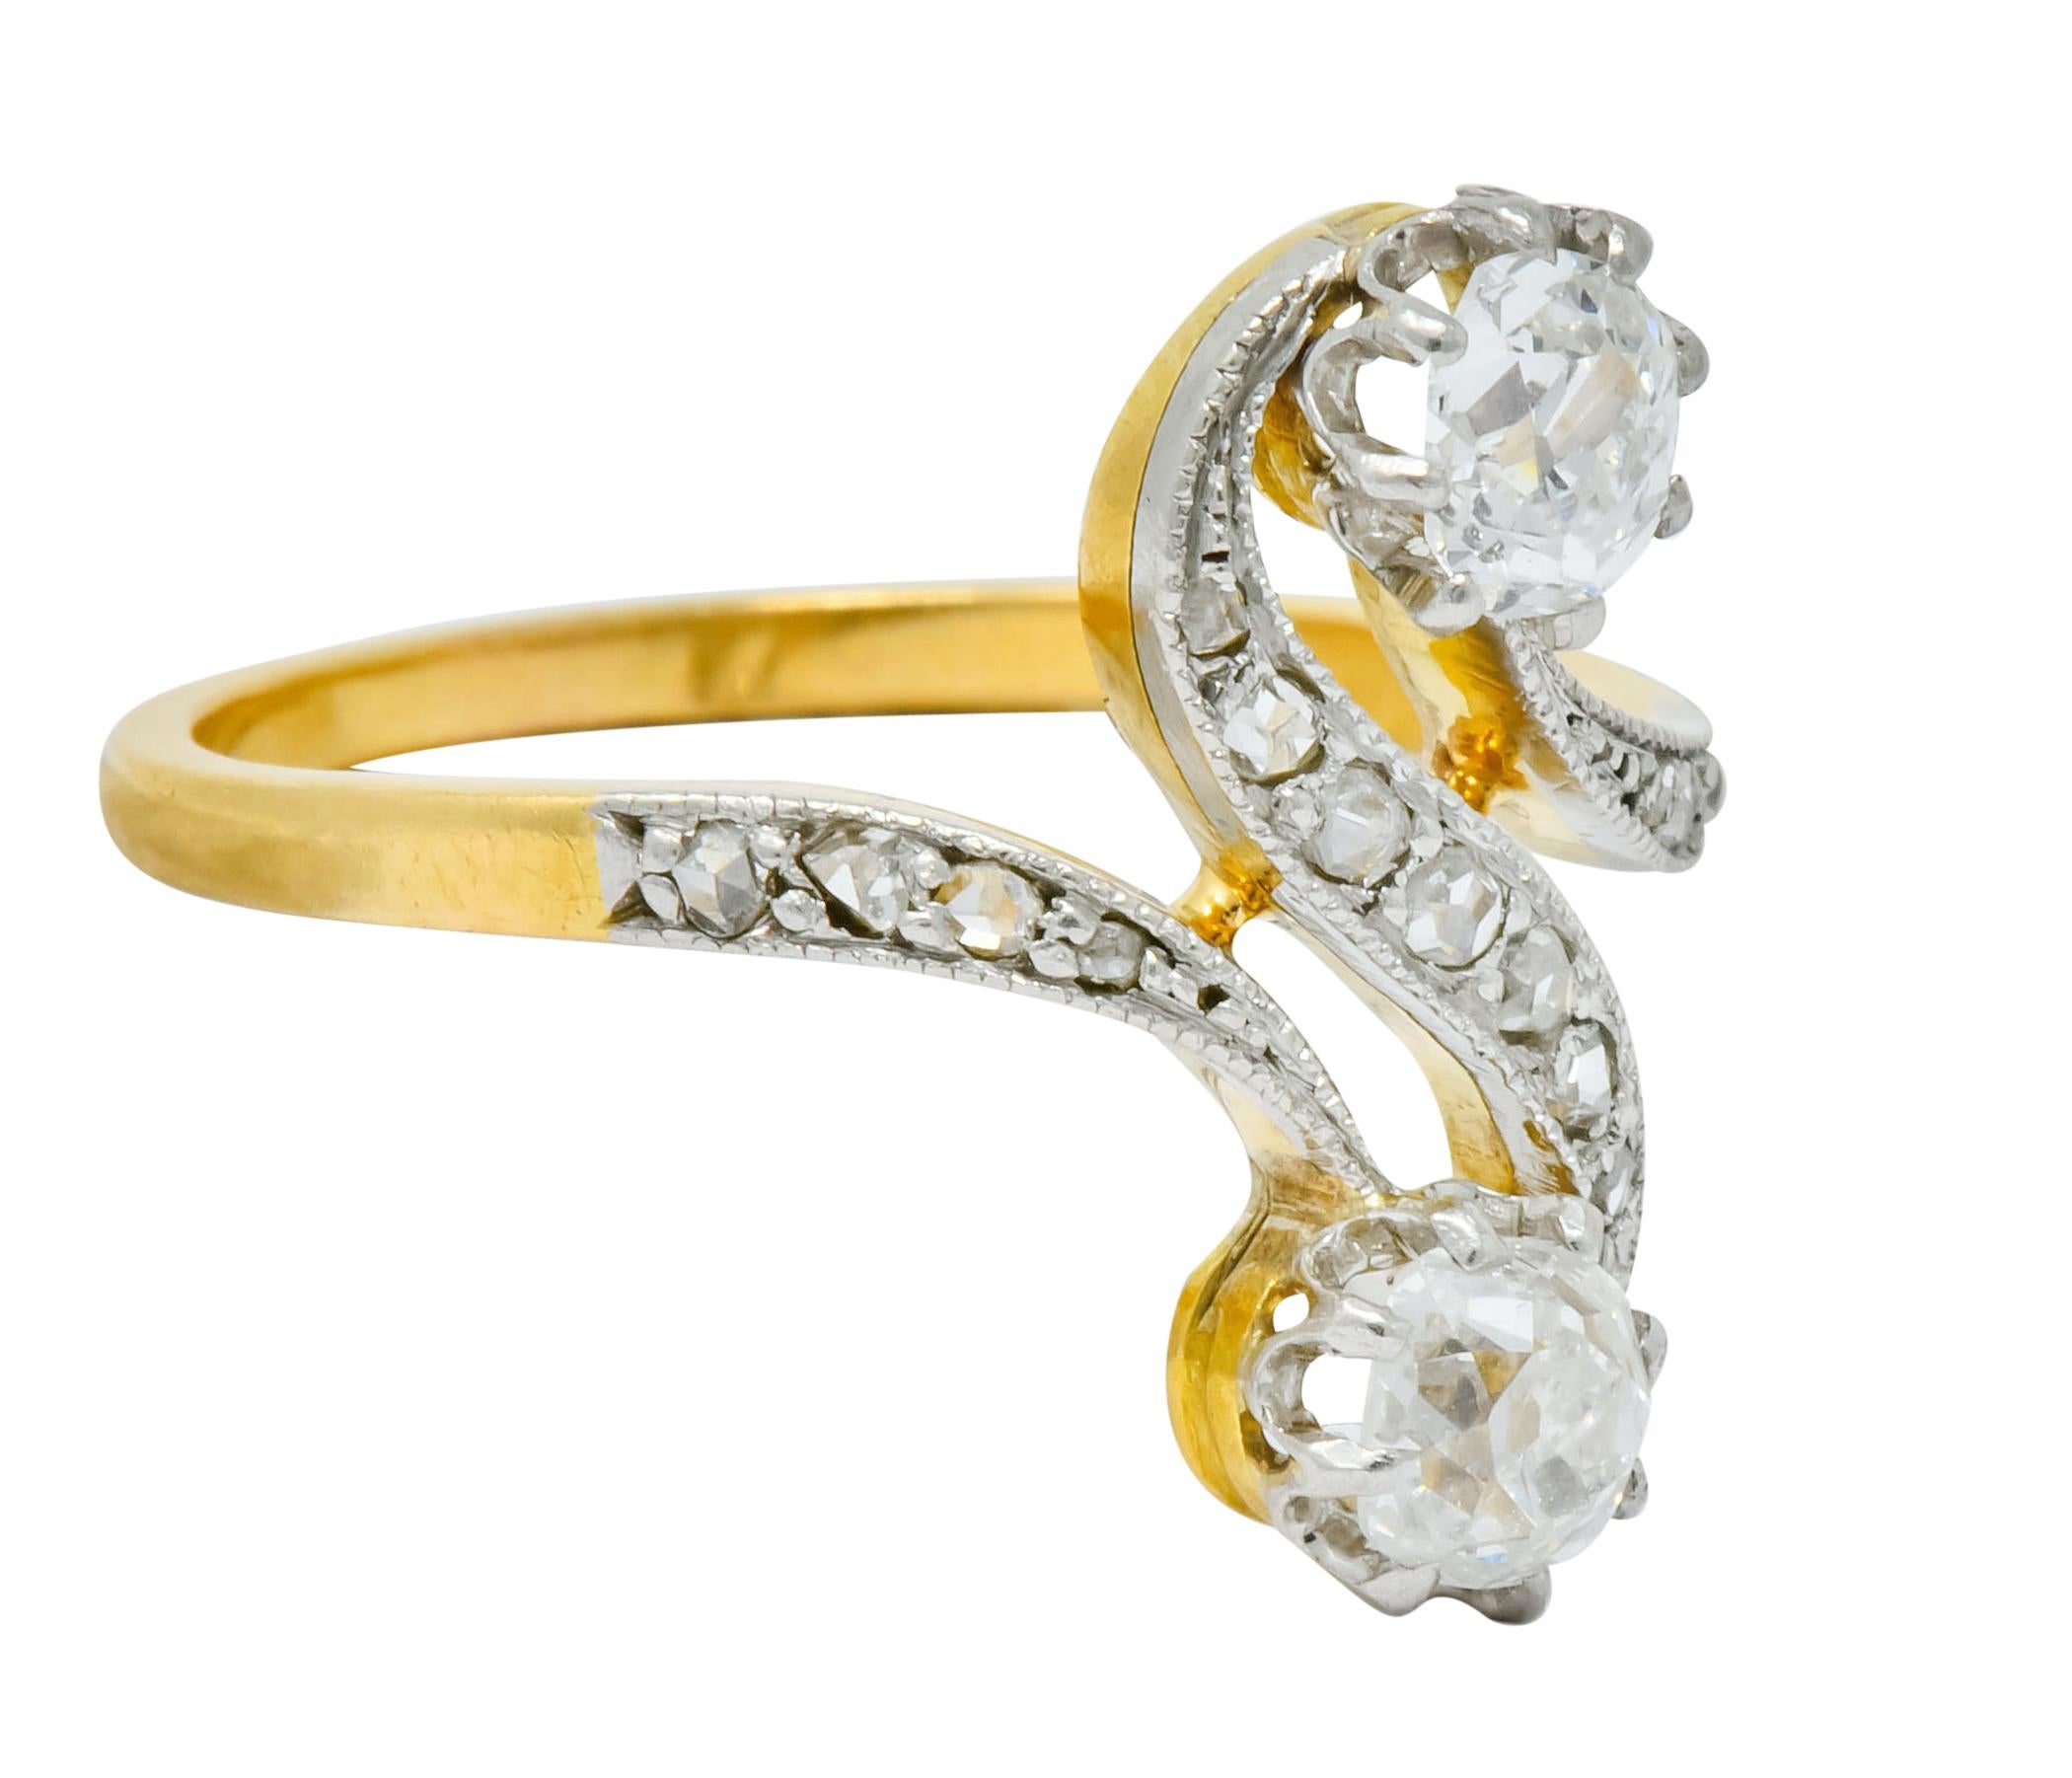 Bypass style ring centers two old mine cut diamonds - claw set opposed in an 'S' motif

Double diamond motif is the Toi et Moi style to mean 'You and Me'

Old mine cut diamonds weigh in total approximately 0.54 carat - H/I color with SI